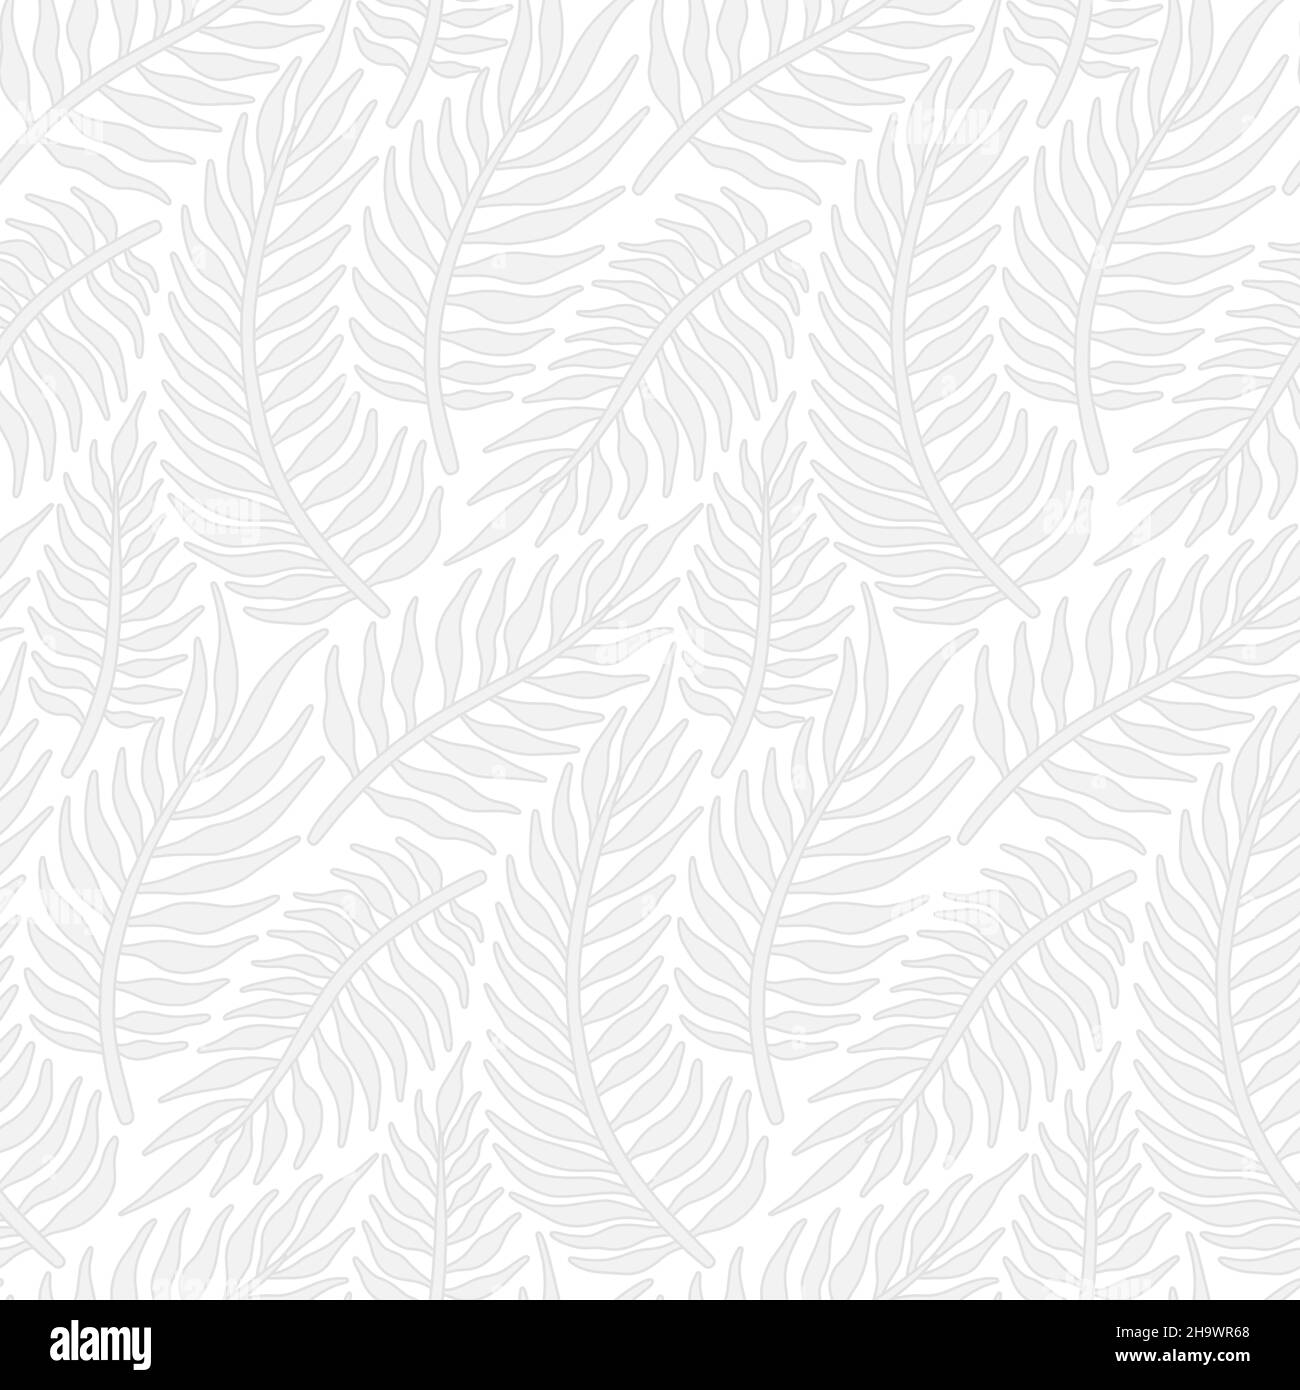 Awesome Abstract Elegant Leaves Vector Seamless Pattern Design Stock Vector